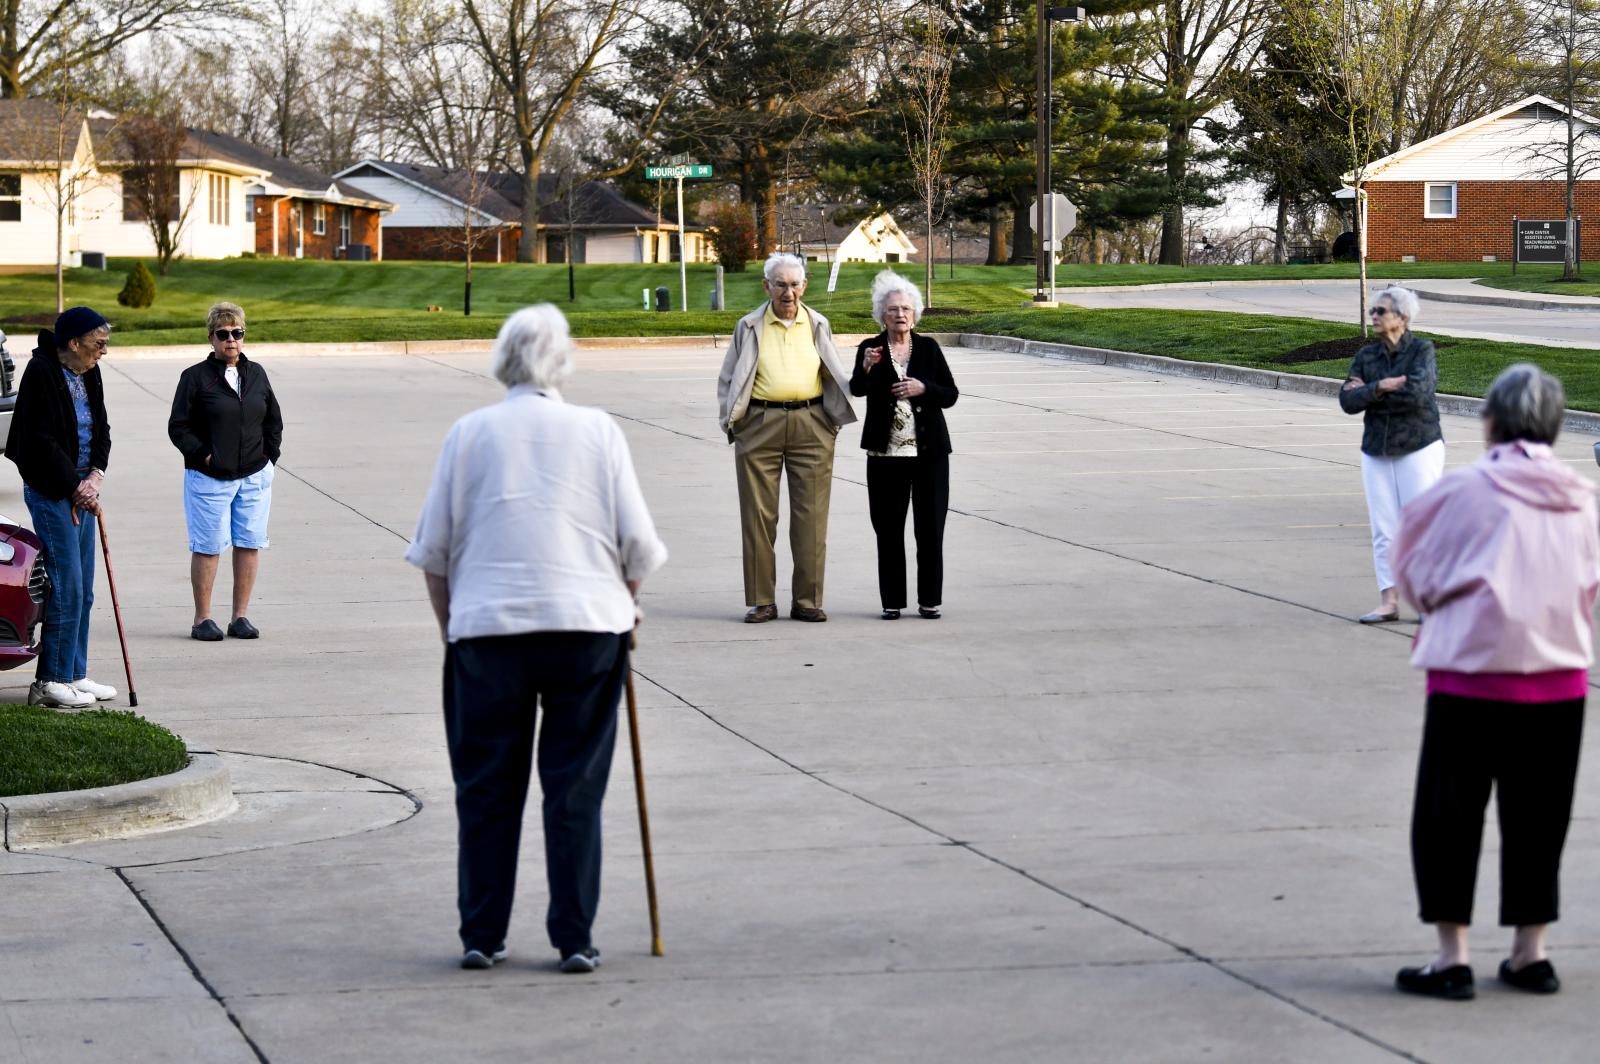 Image from Features - Residents of Lenoir Woods Retirement Community gather...